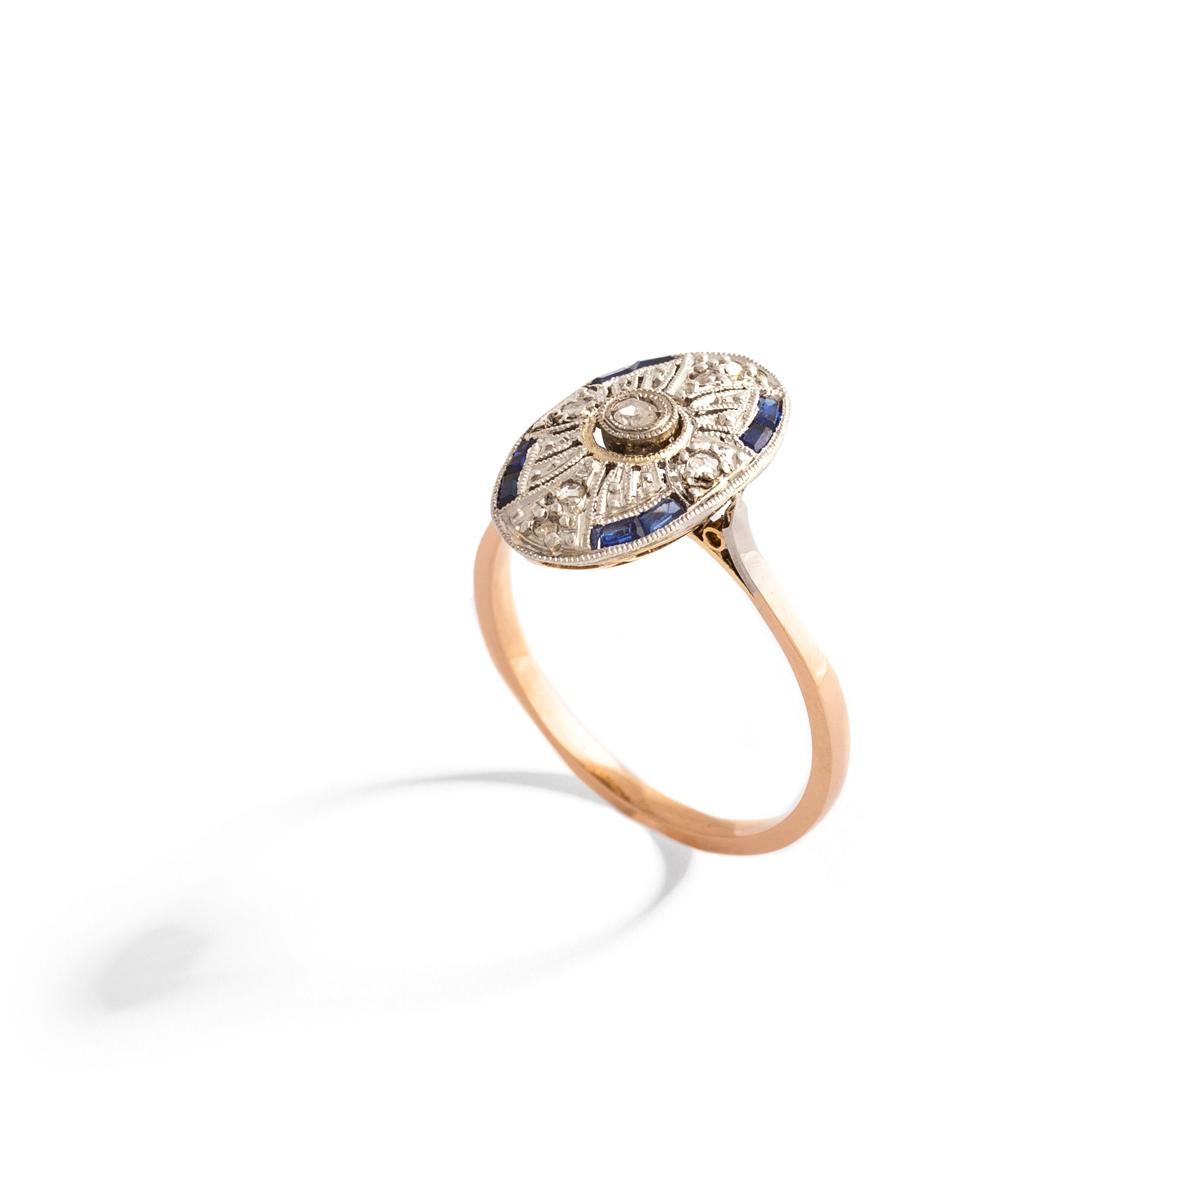 Art Deco Diamond and calibrated Sapphire on yellow gold and platinum Ring.
Central Diamond estimated weight: 0.14 carat.
Gross weight: 2.45 grams.